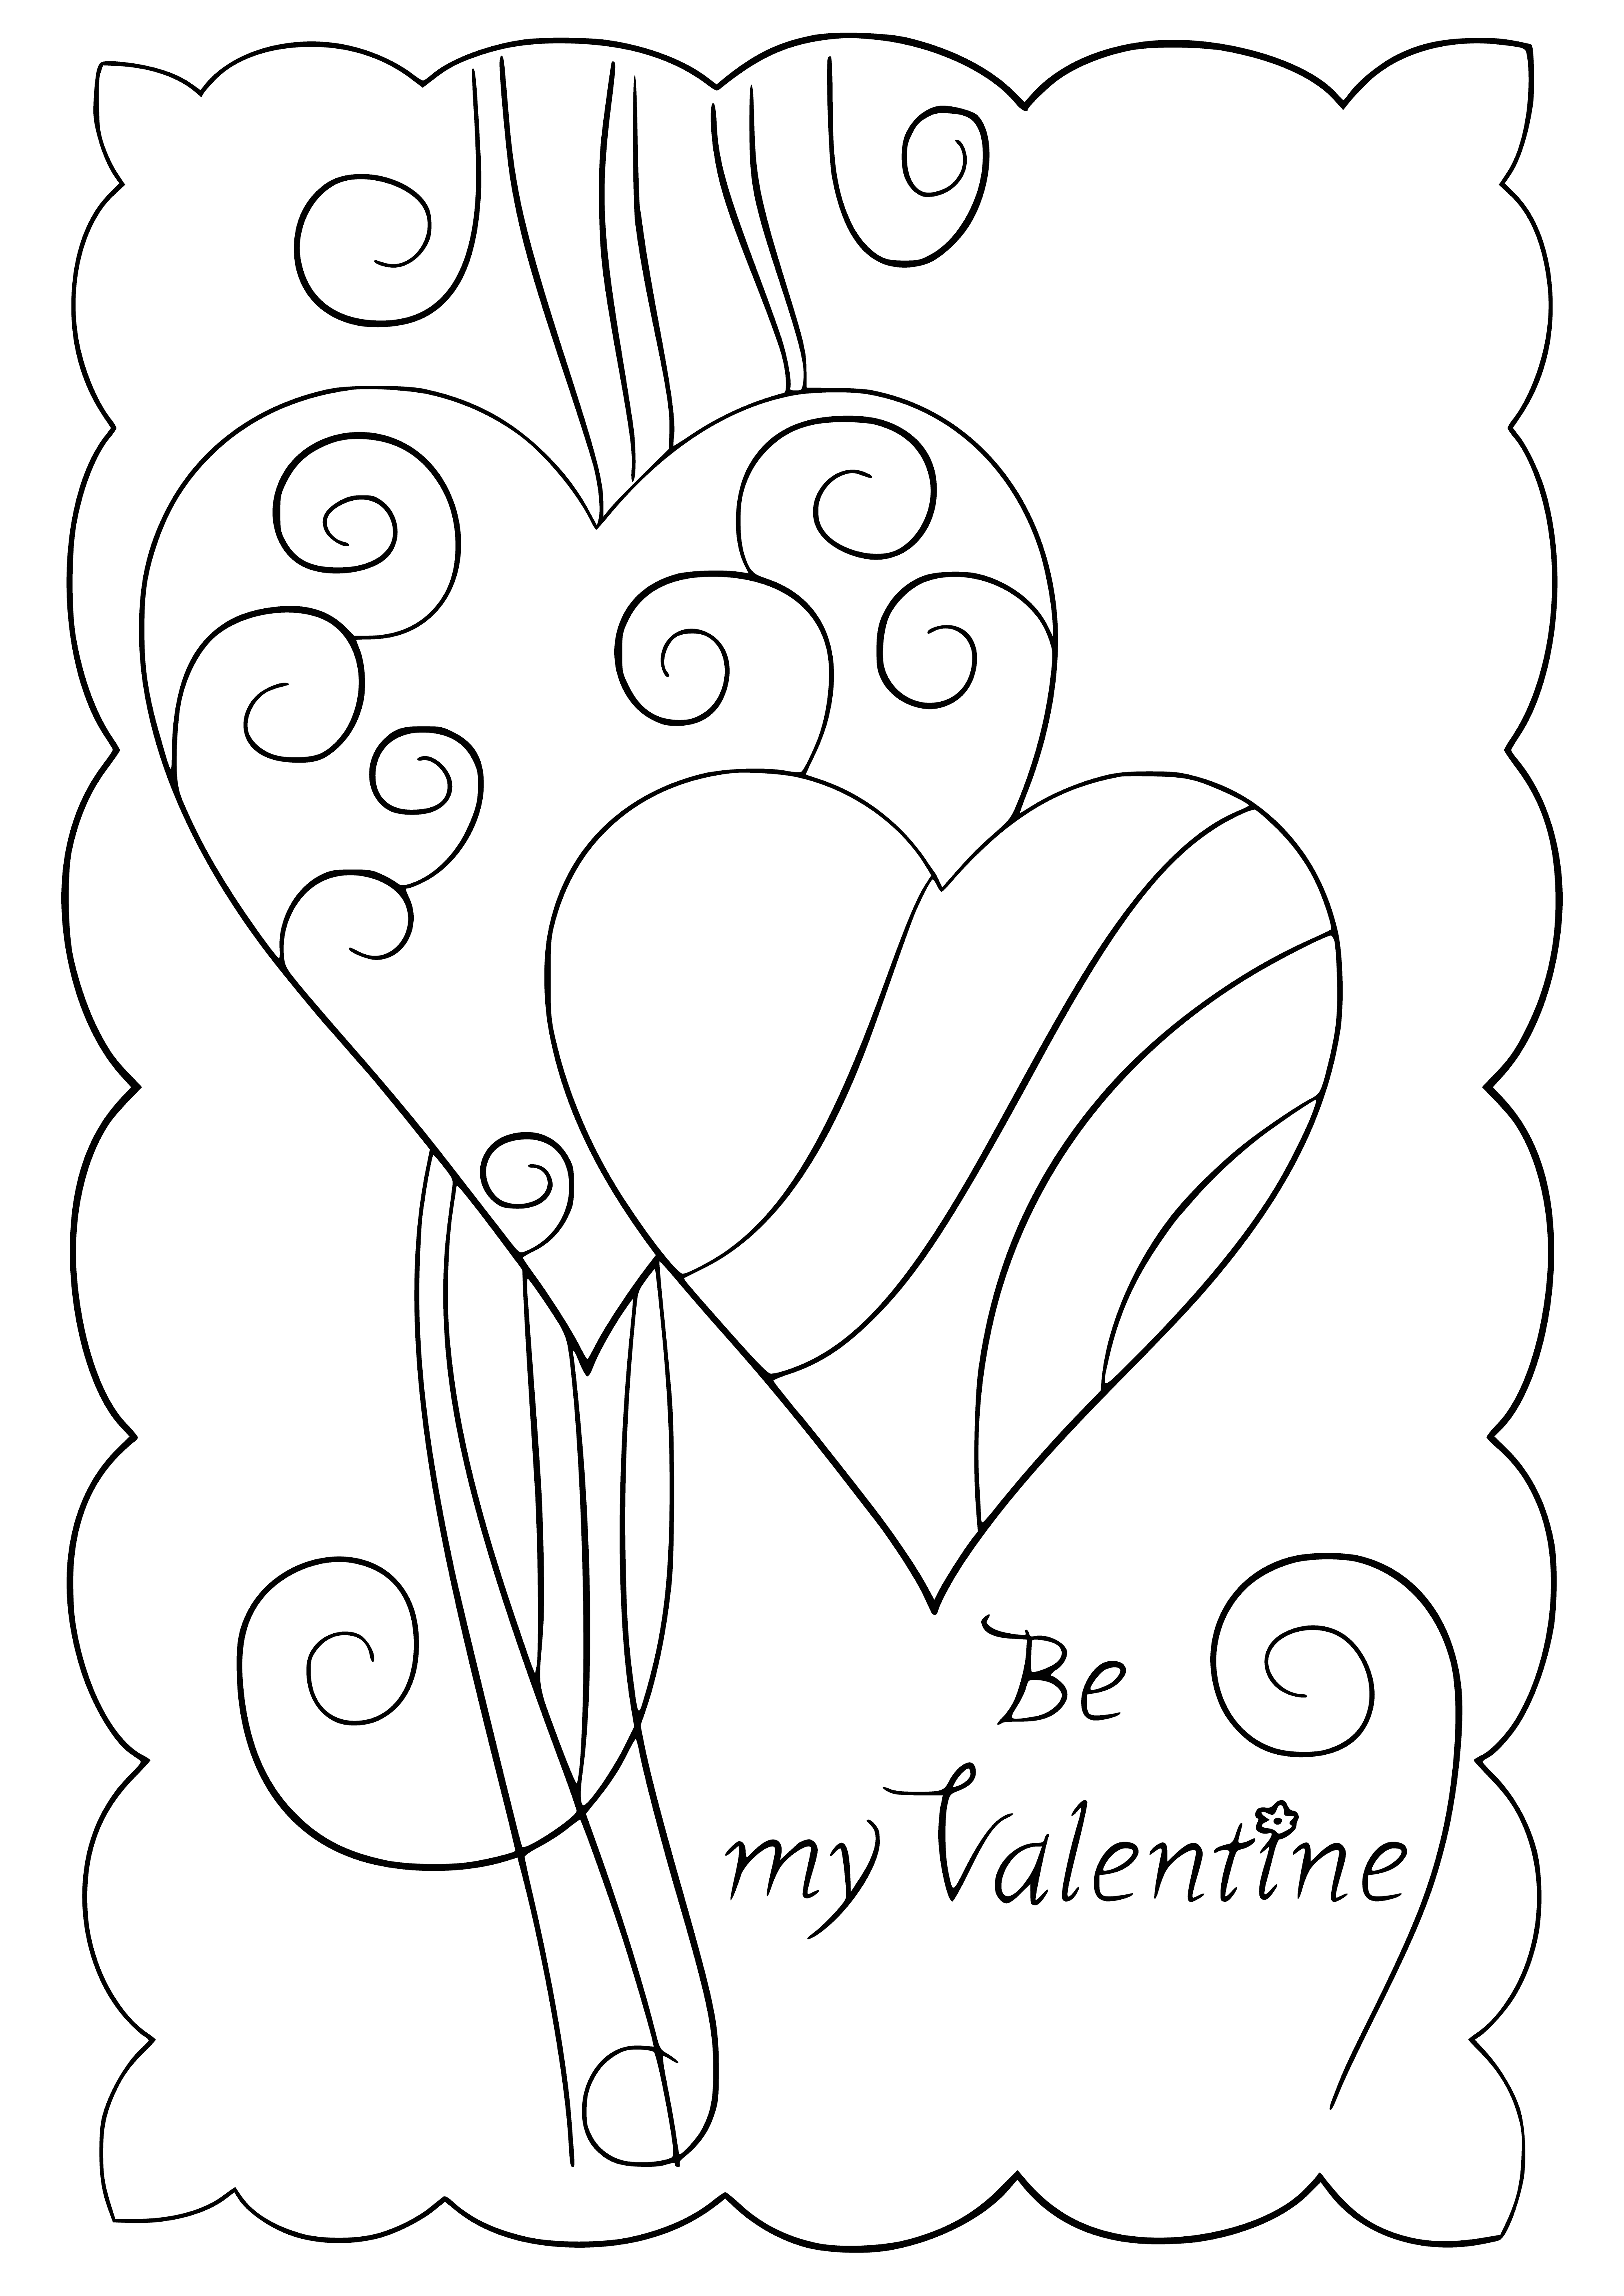 coloring page: Happy Valentine's Day! Red heart w/ "Love" inside. Red background w/ white heart.